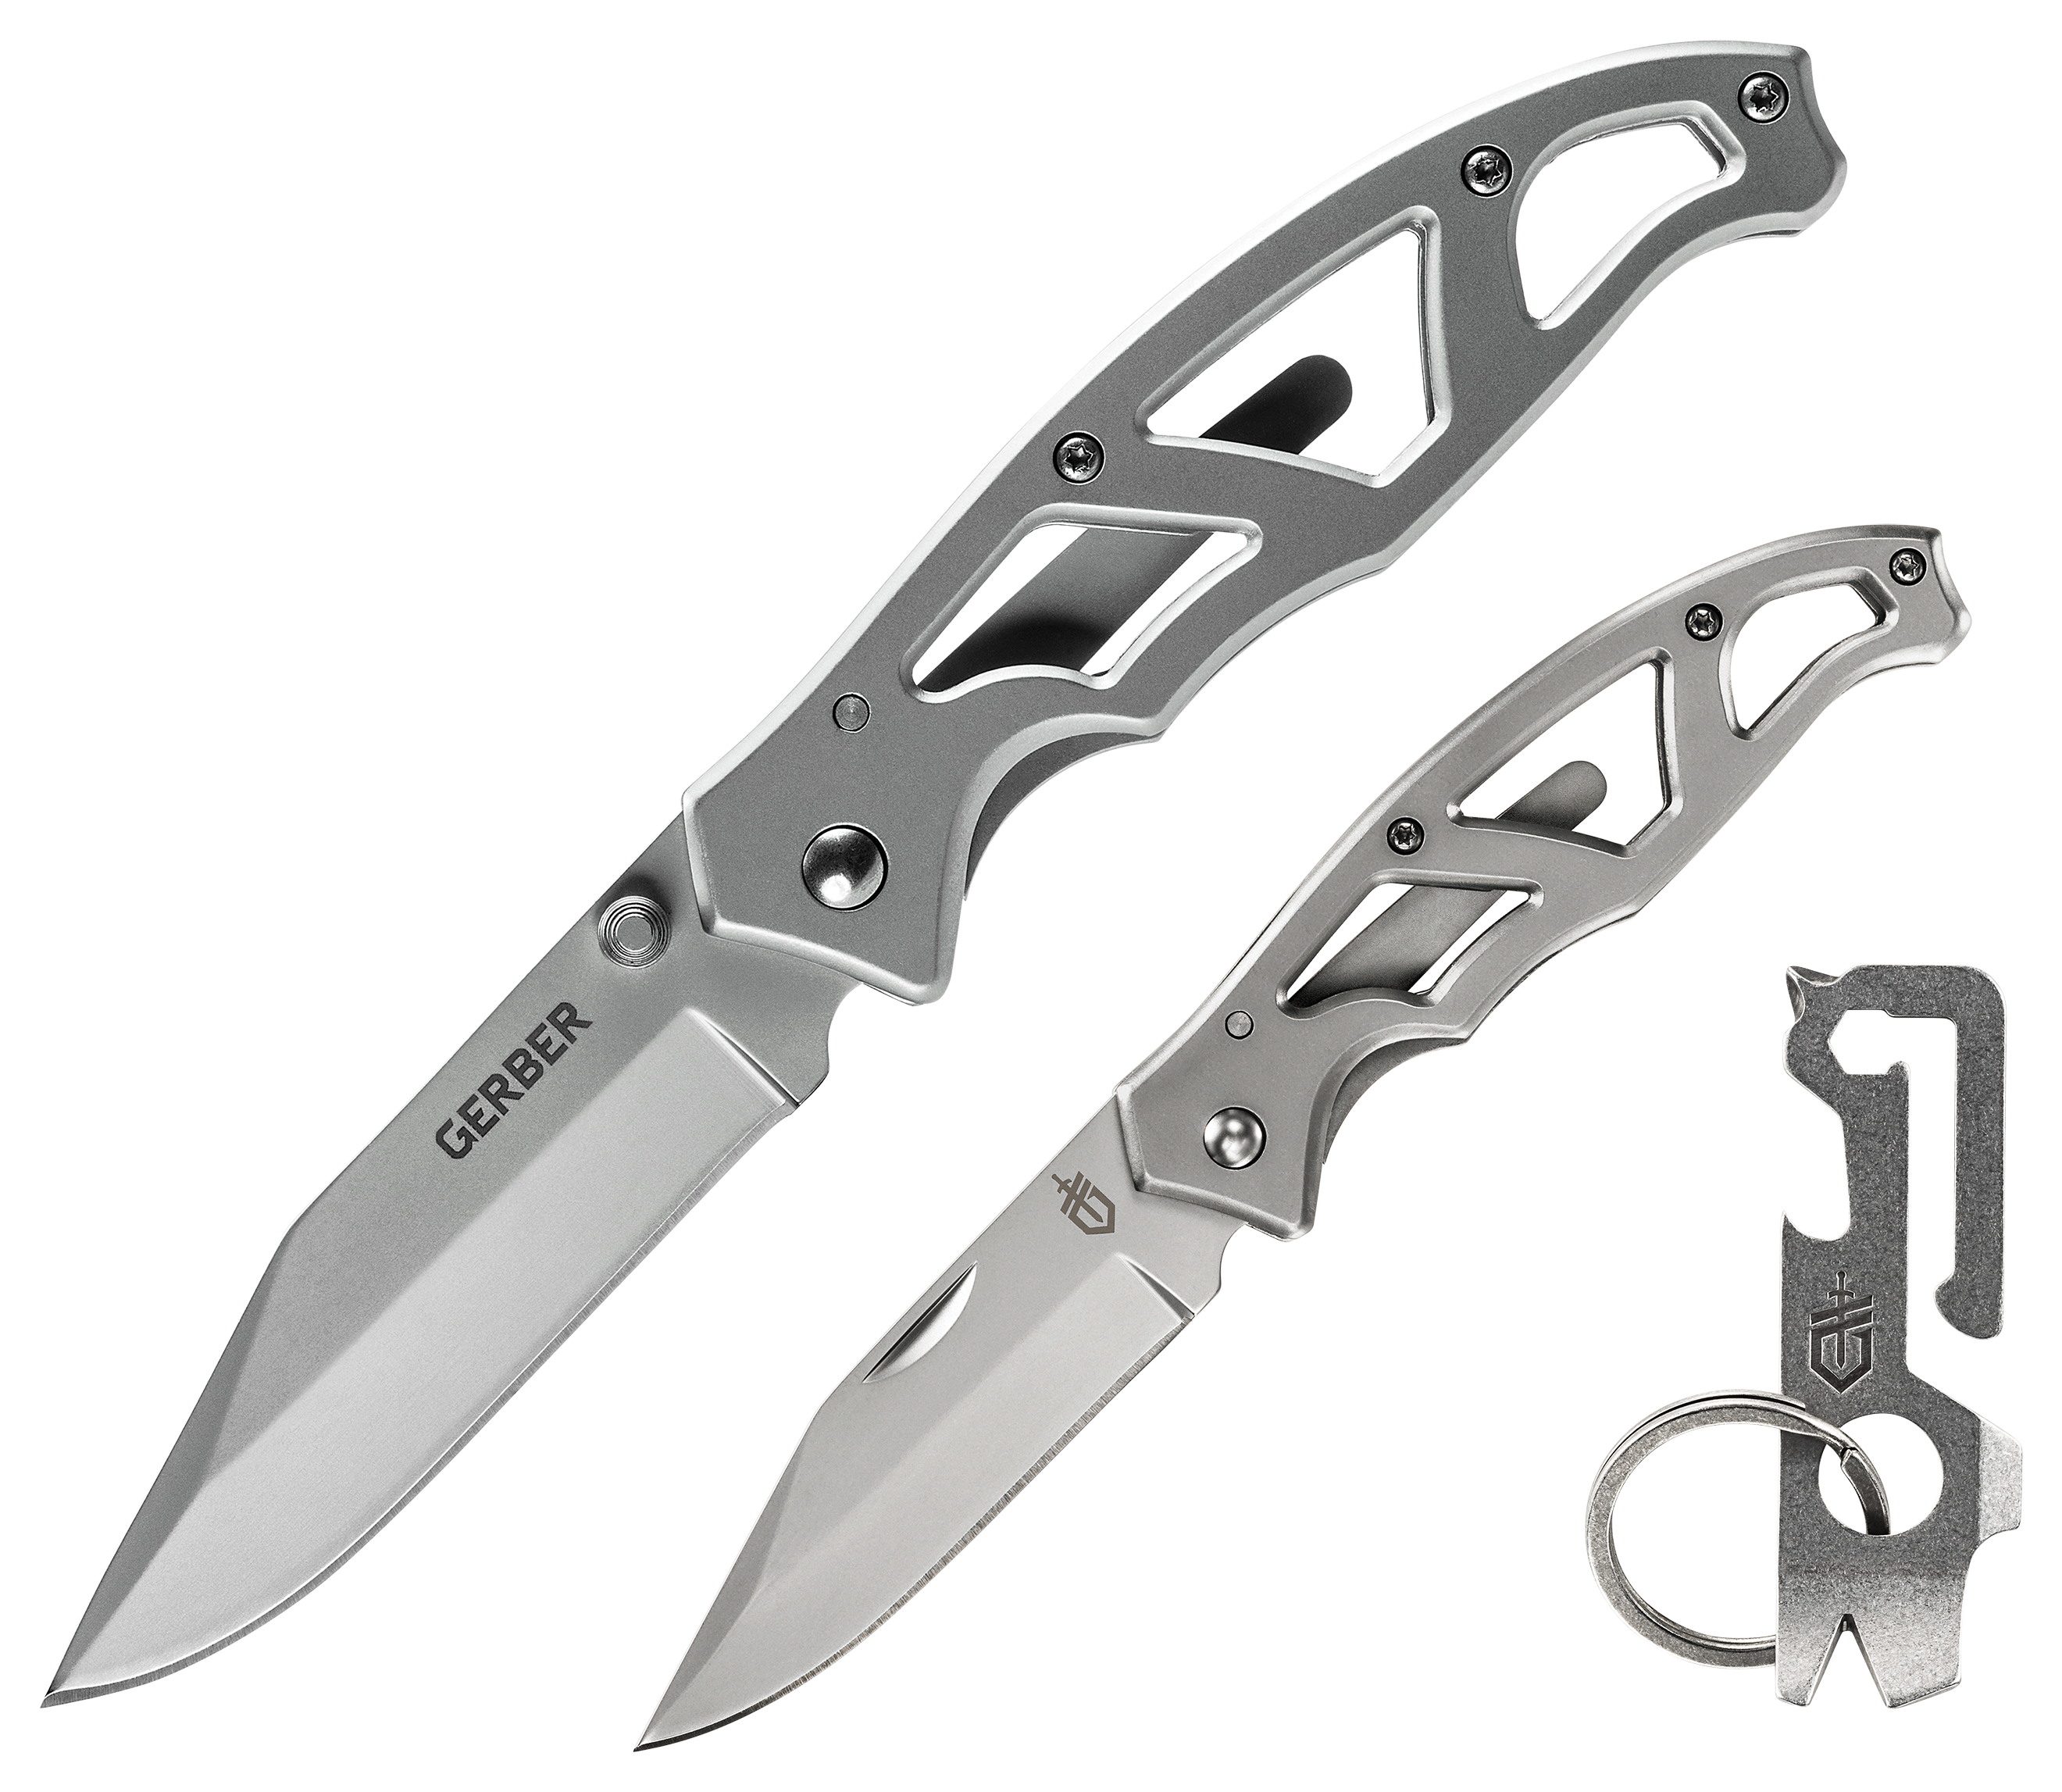 Gerber Paraframe, Mini Paraframe, and Mullet Keychain Tool Folding Knife  Combo